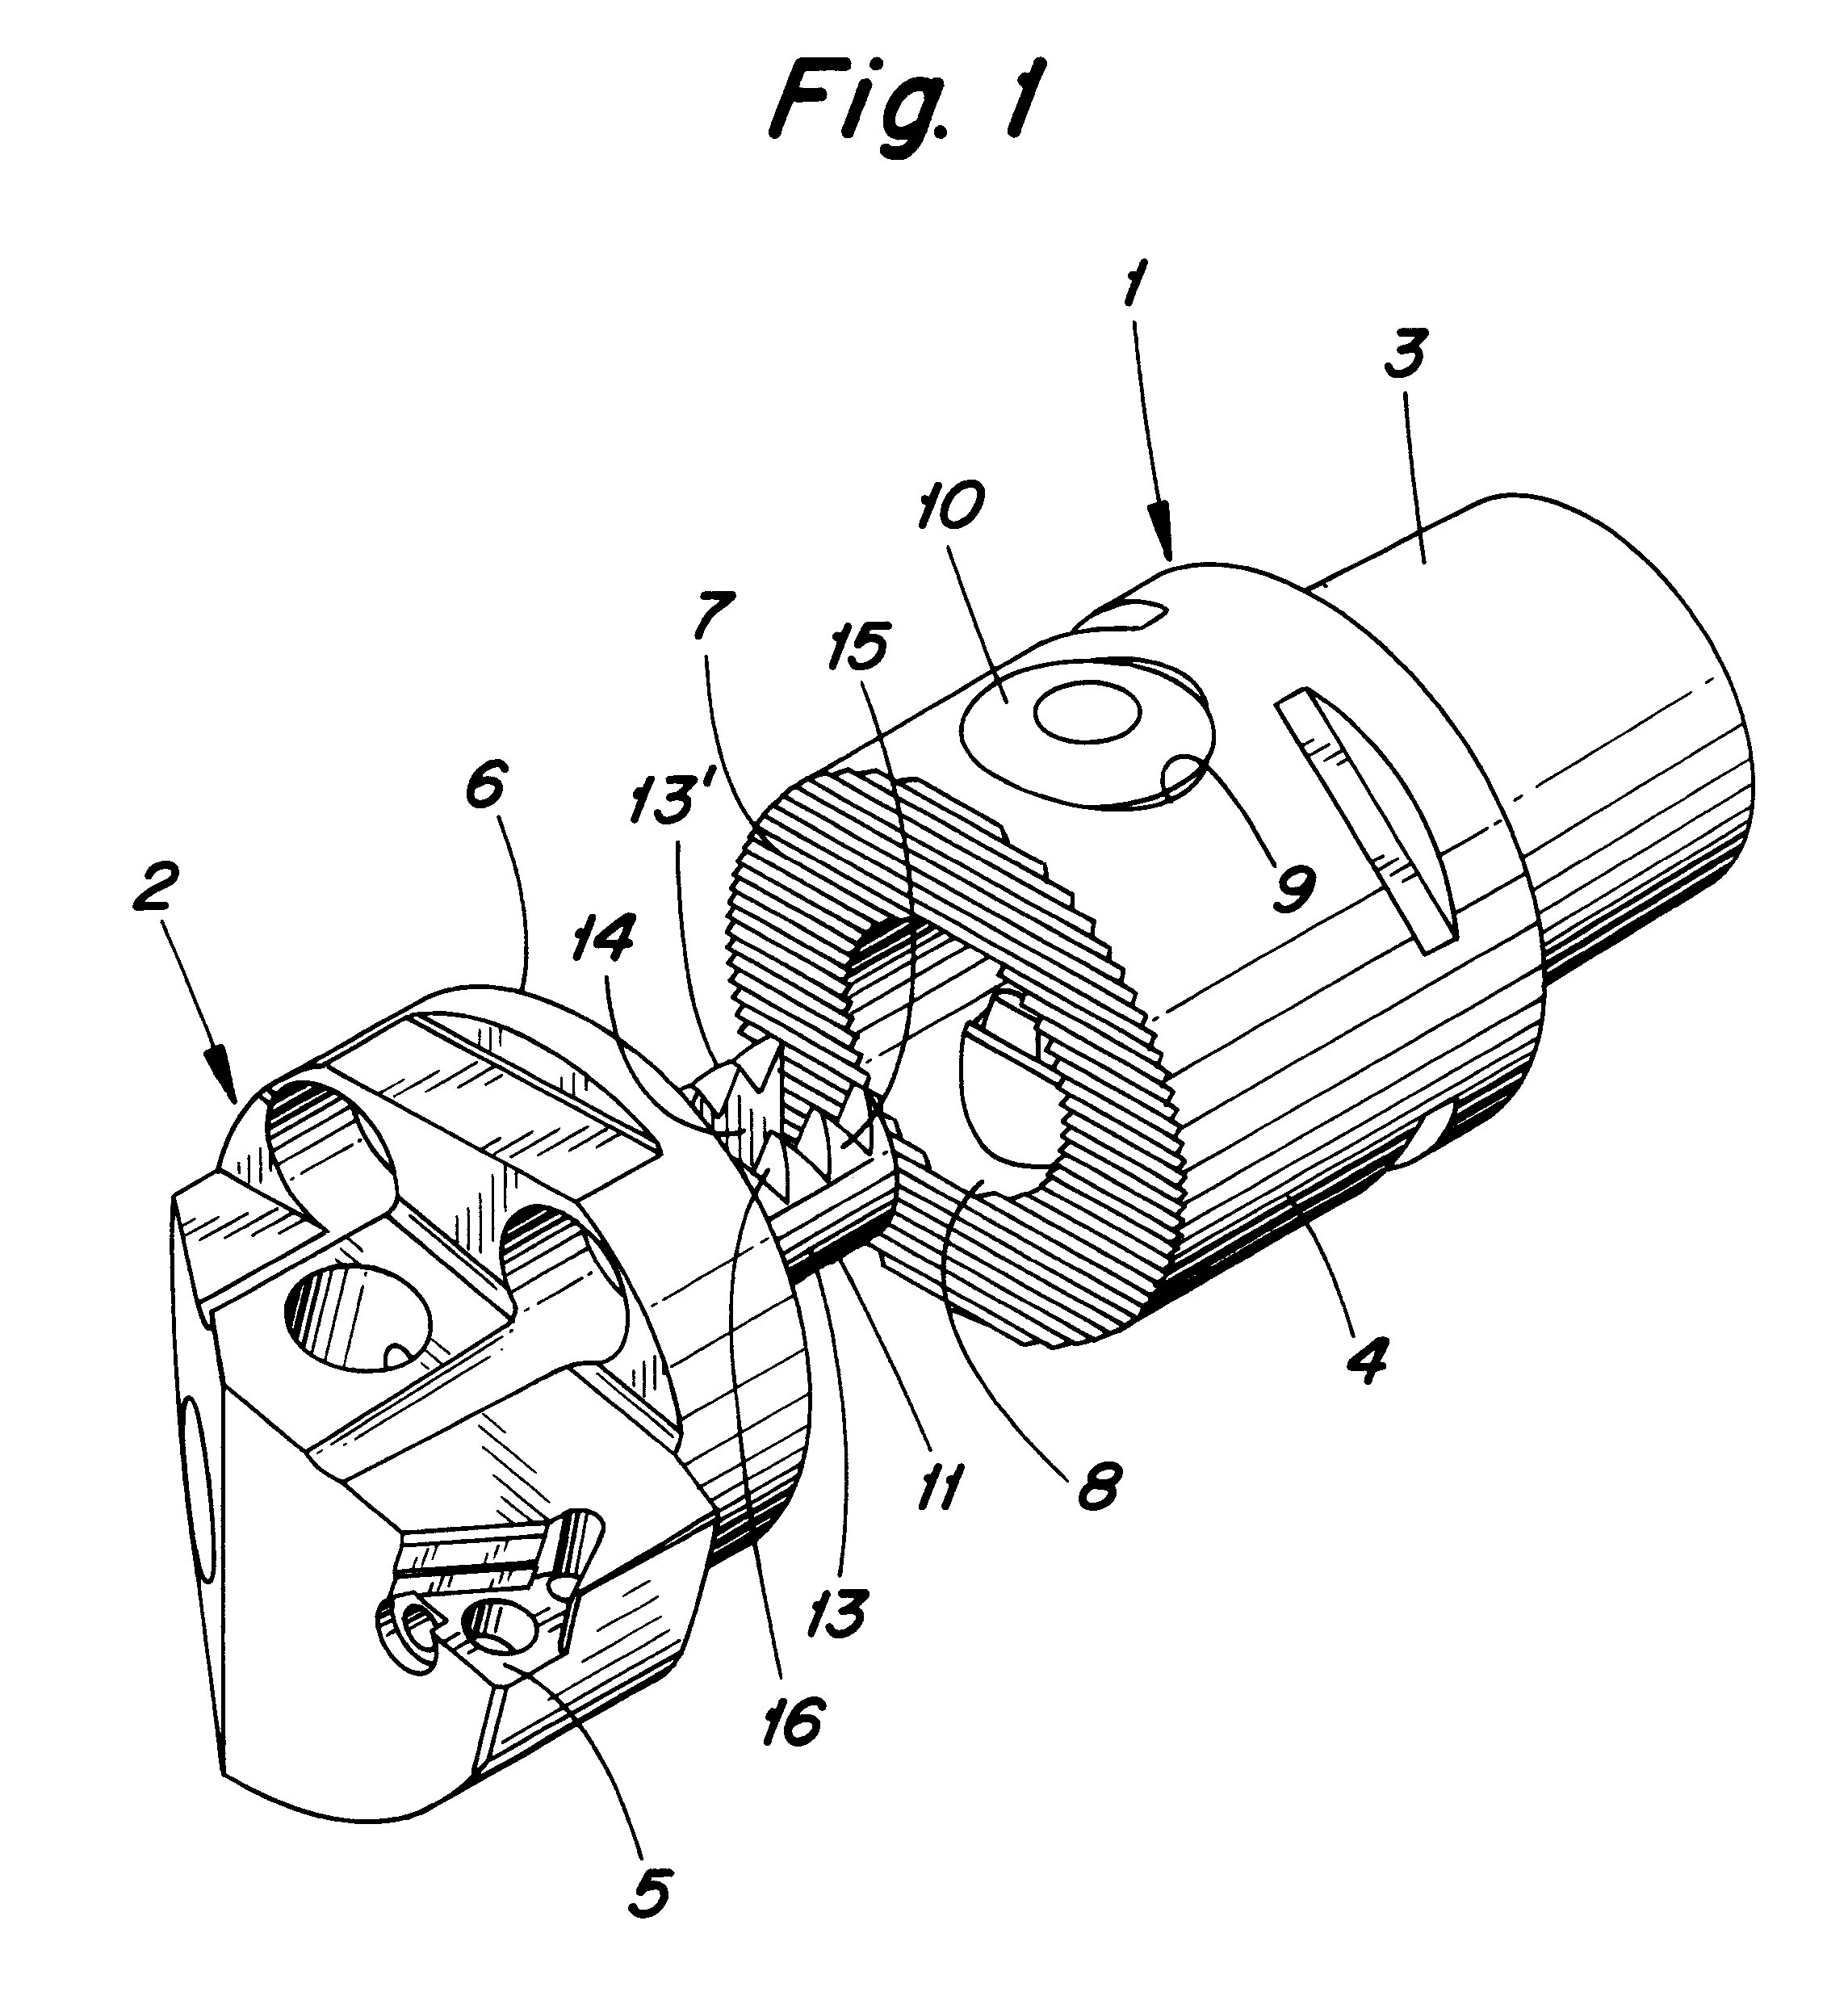 Tool coupling having serrated surfaces adapted to be pulled into meshing relationship